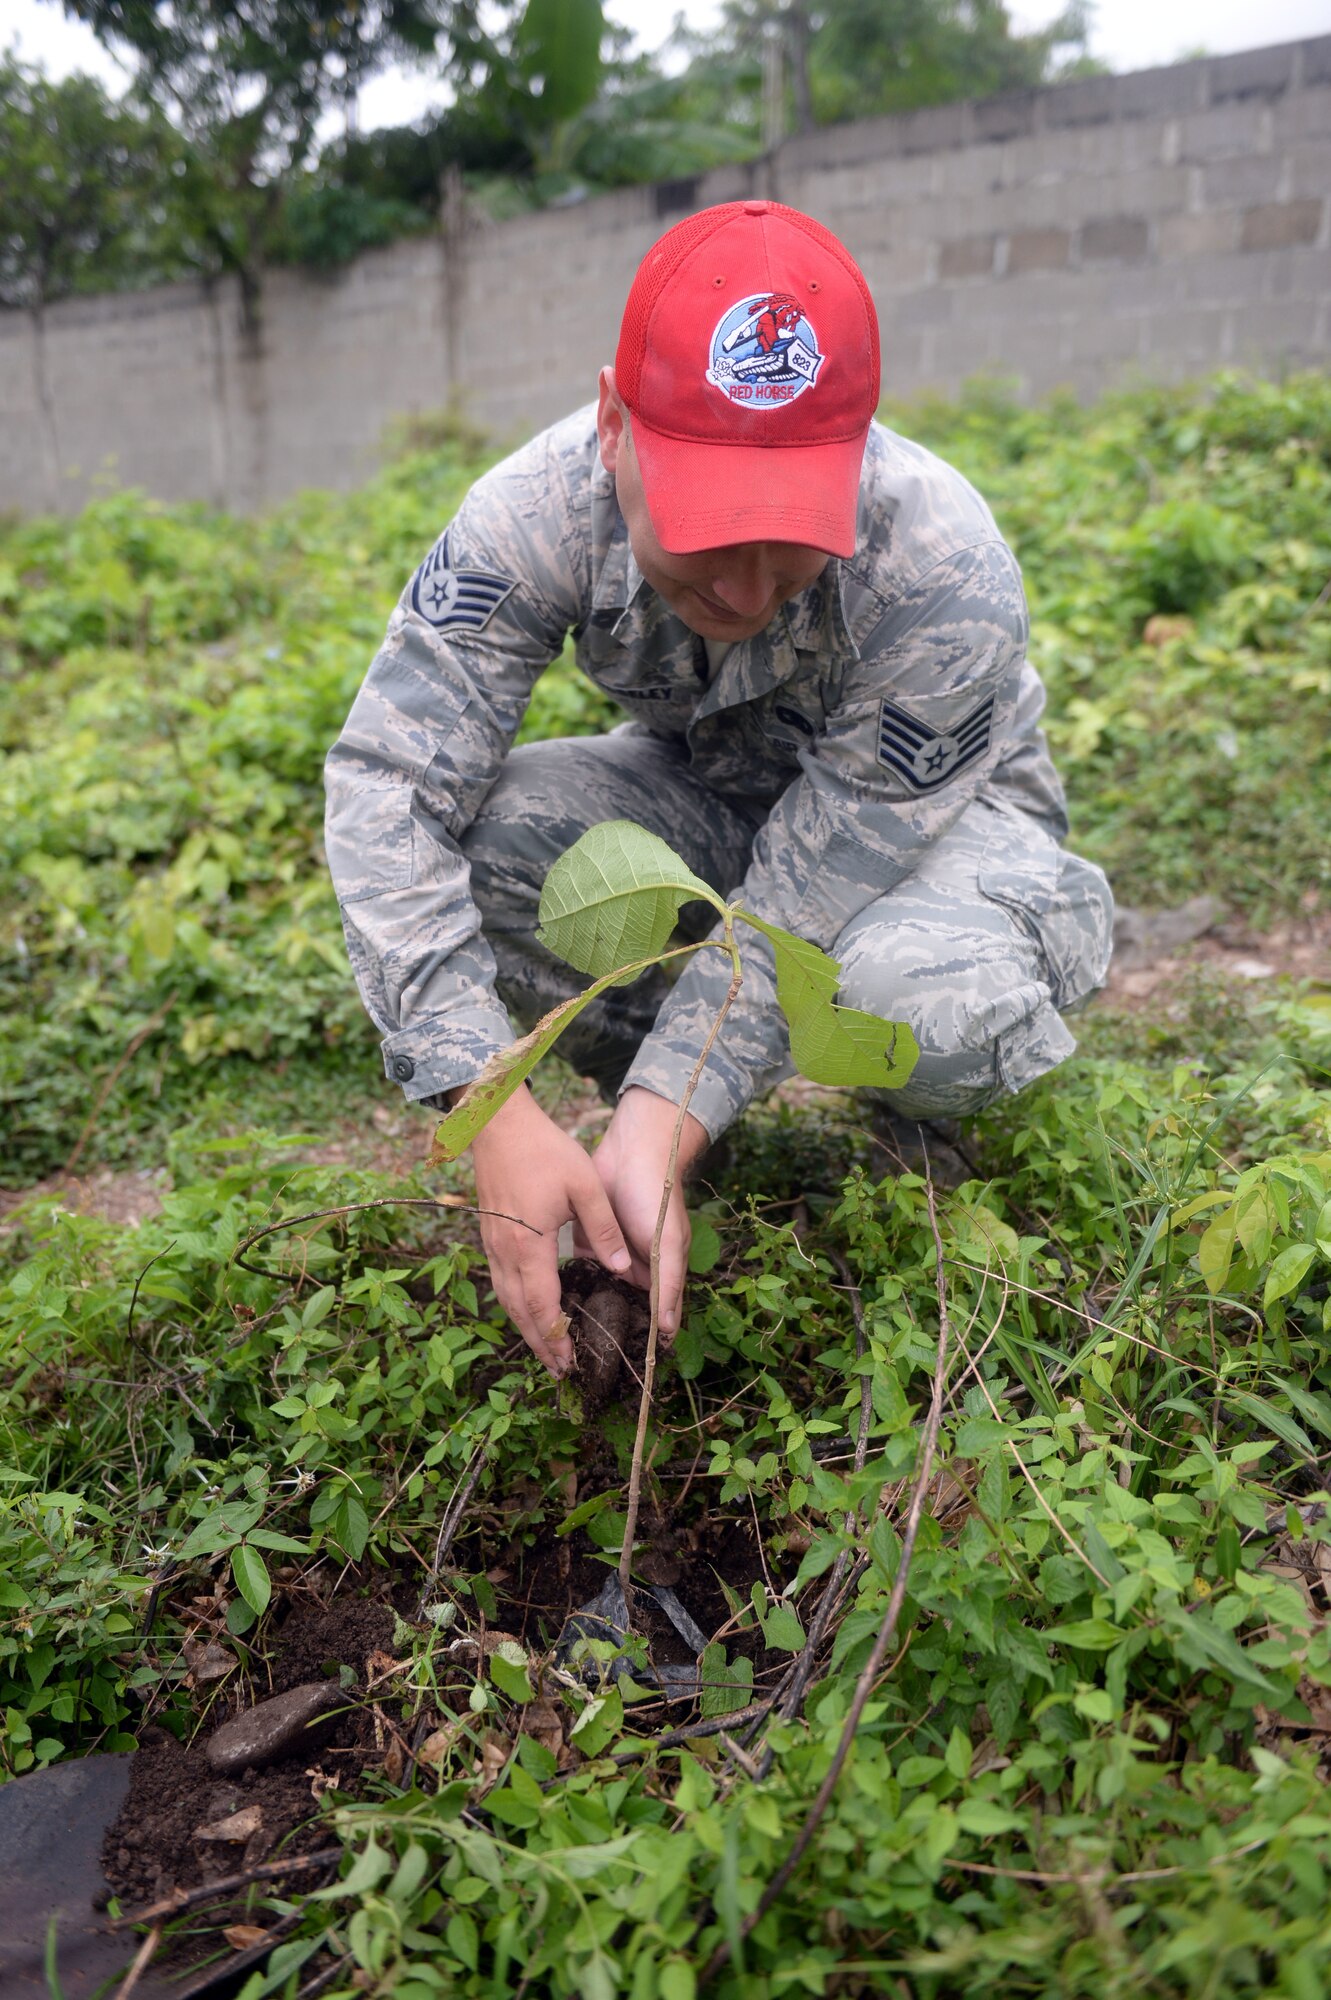 U.S. Staff Sgt. David Mosley, 823rd Expeditionary RED HORSE Squadron vehicle maintenance journeyman, out of Hurlburt Field, Fla., helps put dirt at the base of a newly planted tree during the National Tree Day celebration at Rafeal Peneda Ponce School in Trujillo, Honduras, June 19, 2015. Mosley is a member of the NEW HORIZONS Honduras 2015 training exercise which is providing support throughout the Trujillo and Tocoa regions of Honduras by building a new two-classroom schoolhouse in Ocotes Alto, drilling a well in Honduras Aguan, and proving general medical support. NEW HORIZONS was launched in the 1980s and is an annual joint humanitarian assistance exercise that U.S. Southern Command conducts with a partner nation in Central America, South America or the Caribbean. The exercise improves joint training readiness of U.S. and partner nation civil engineers, medical professionals and support personnel through humanitarian assistance activities. (U.S. Air Force photo by Capt. David J. Murphy/Released)